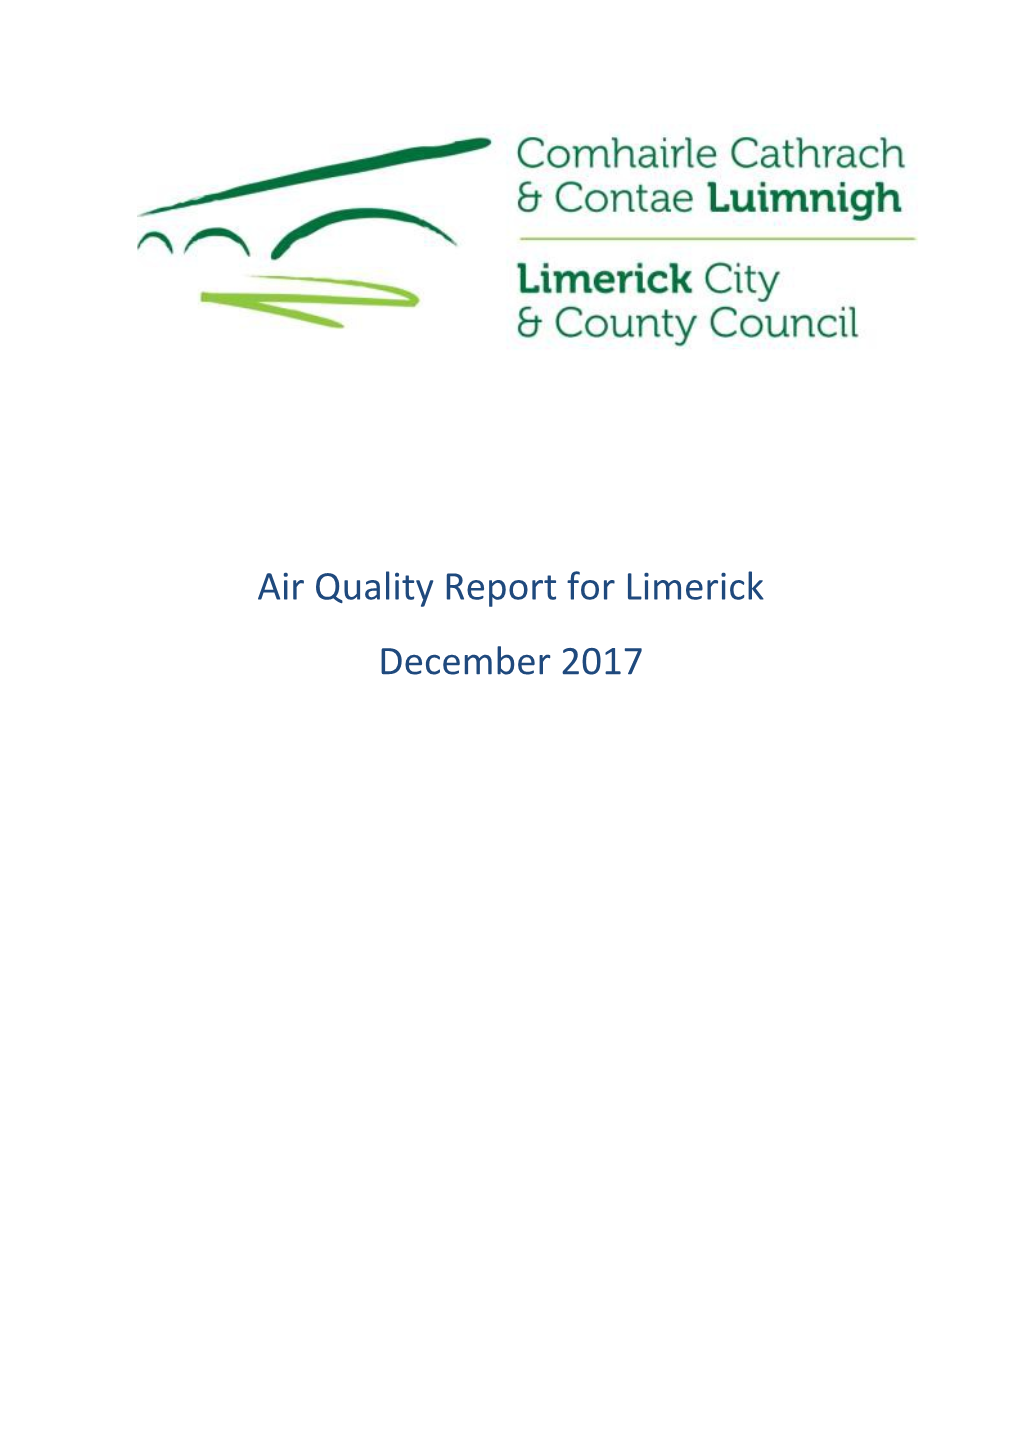 Air Quality Report for Limerick